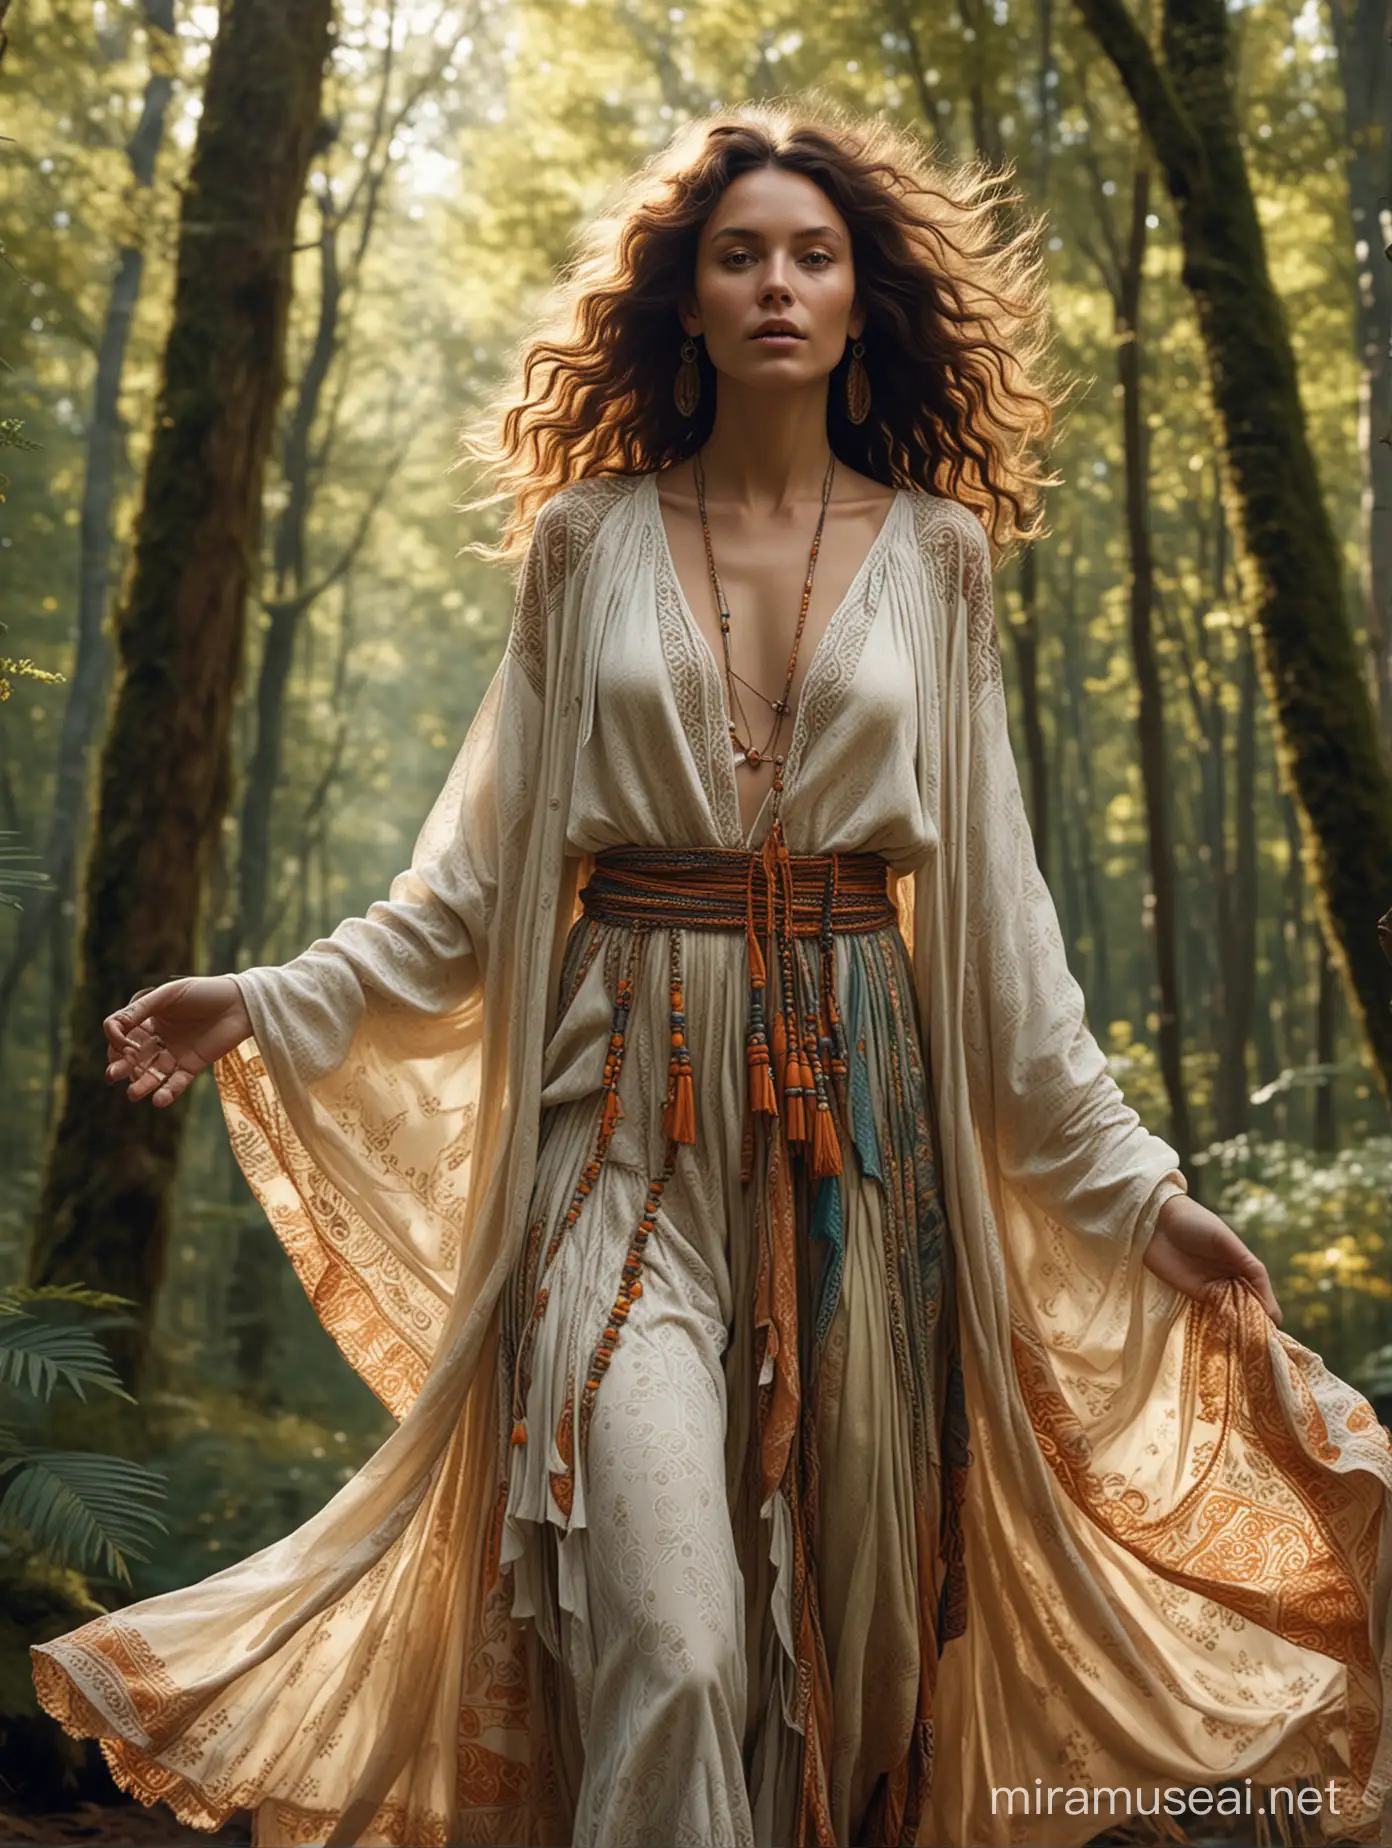 Bring to life an ultra-realistic fashion portrait of a bohemian traveler, adorned in
flowing garments, exploring a serene, sunlit forest during their journey